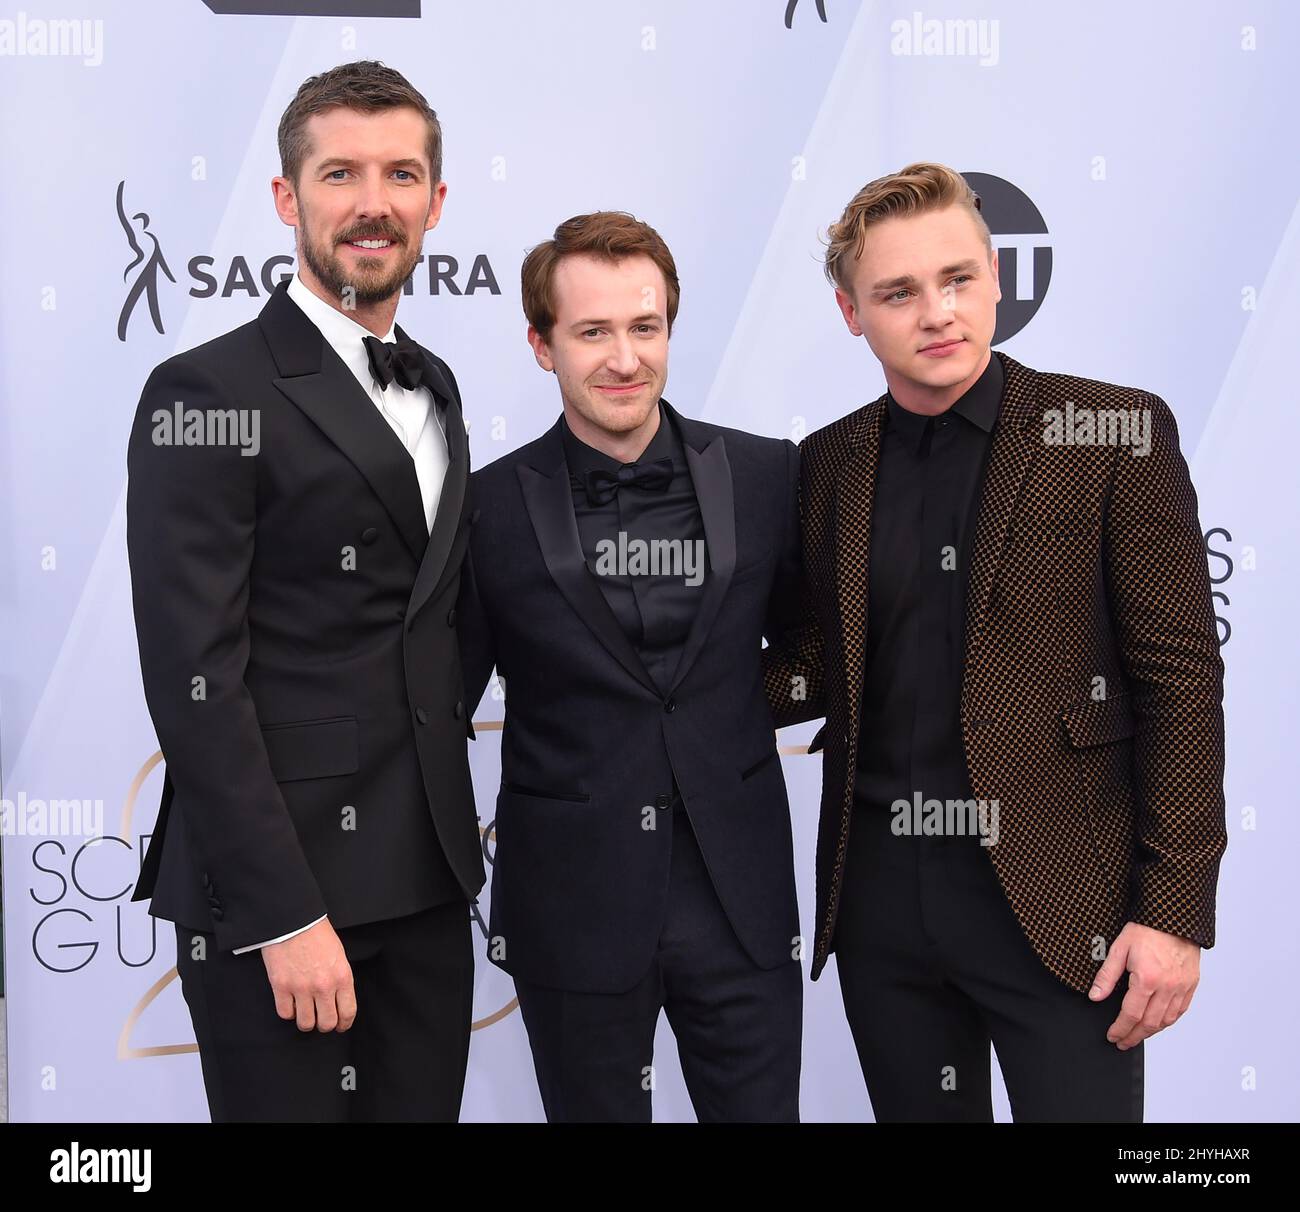 Gwilym Lee, Joseph Mazzello and Ben Hardy attending the 25th Annual Screen Actors Guild Awards held at the Shrine Auditorium Stock Photo